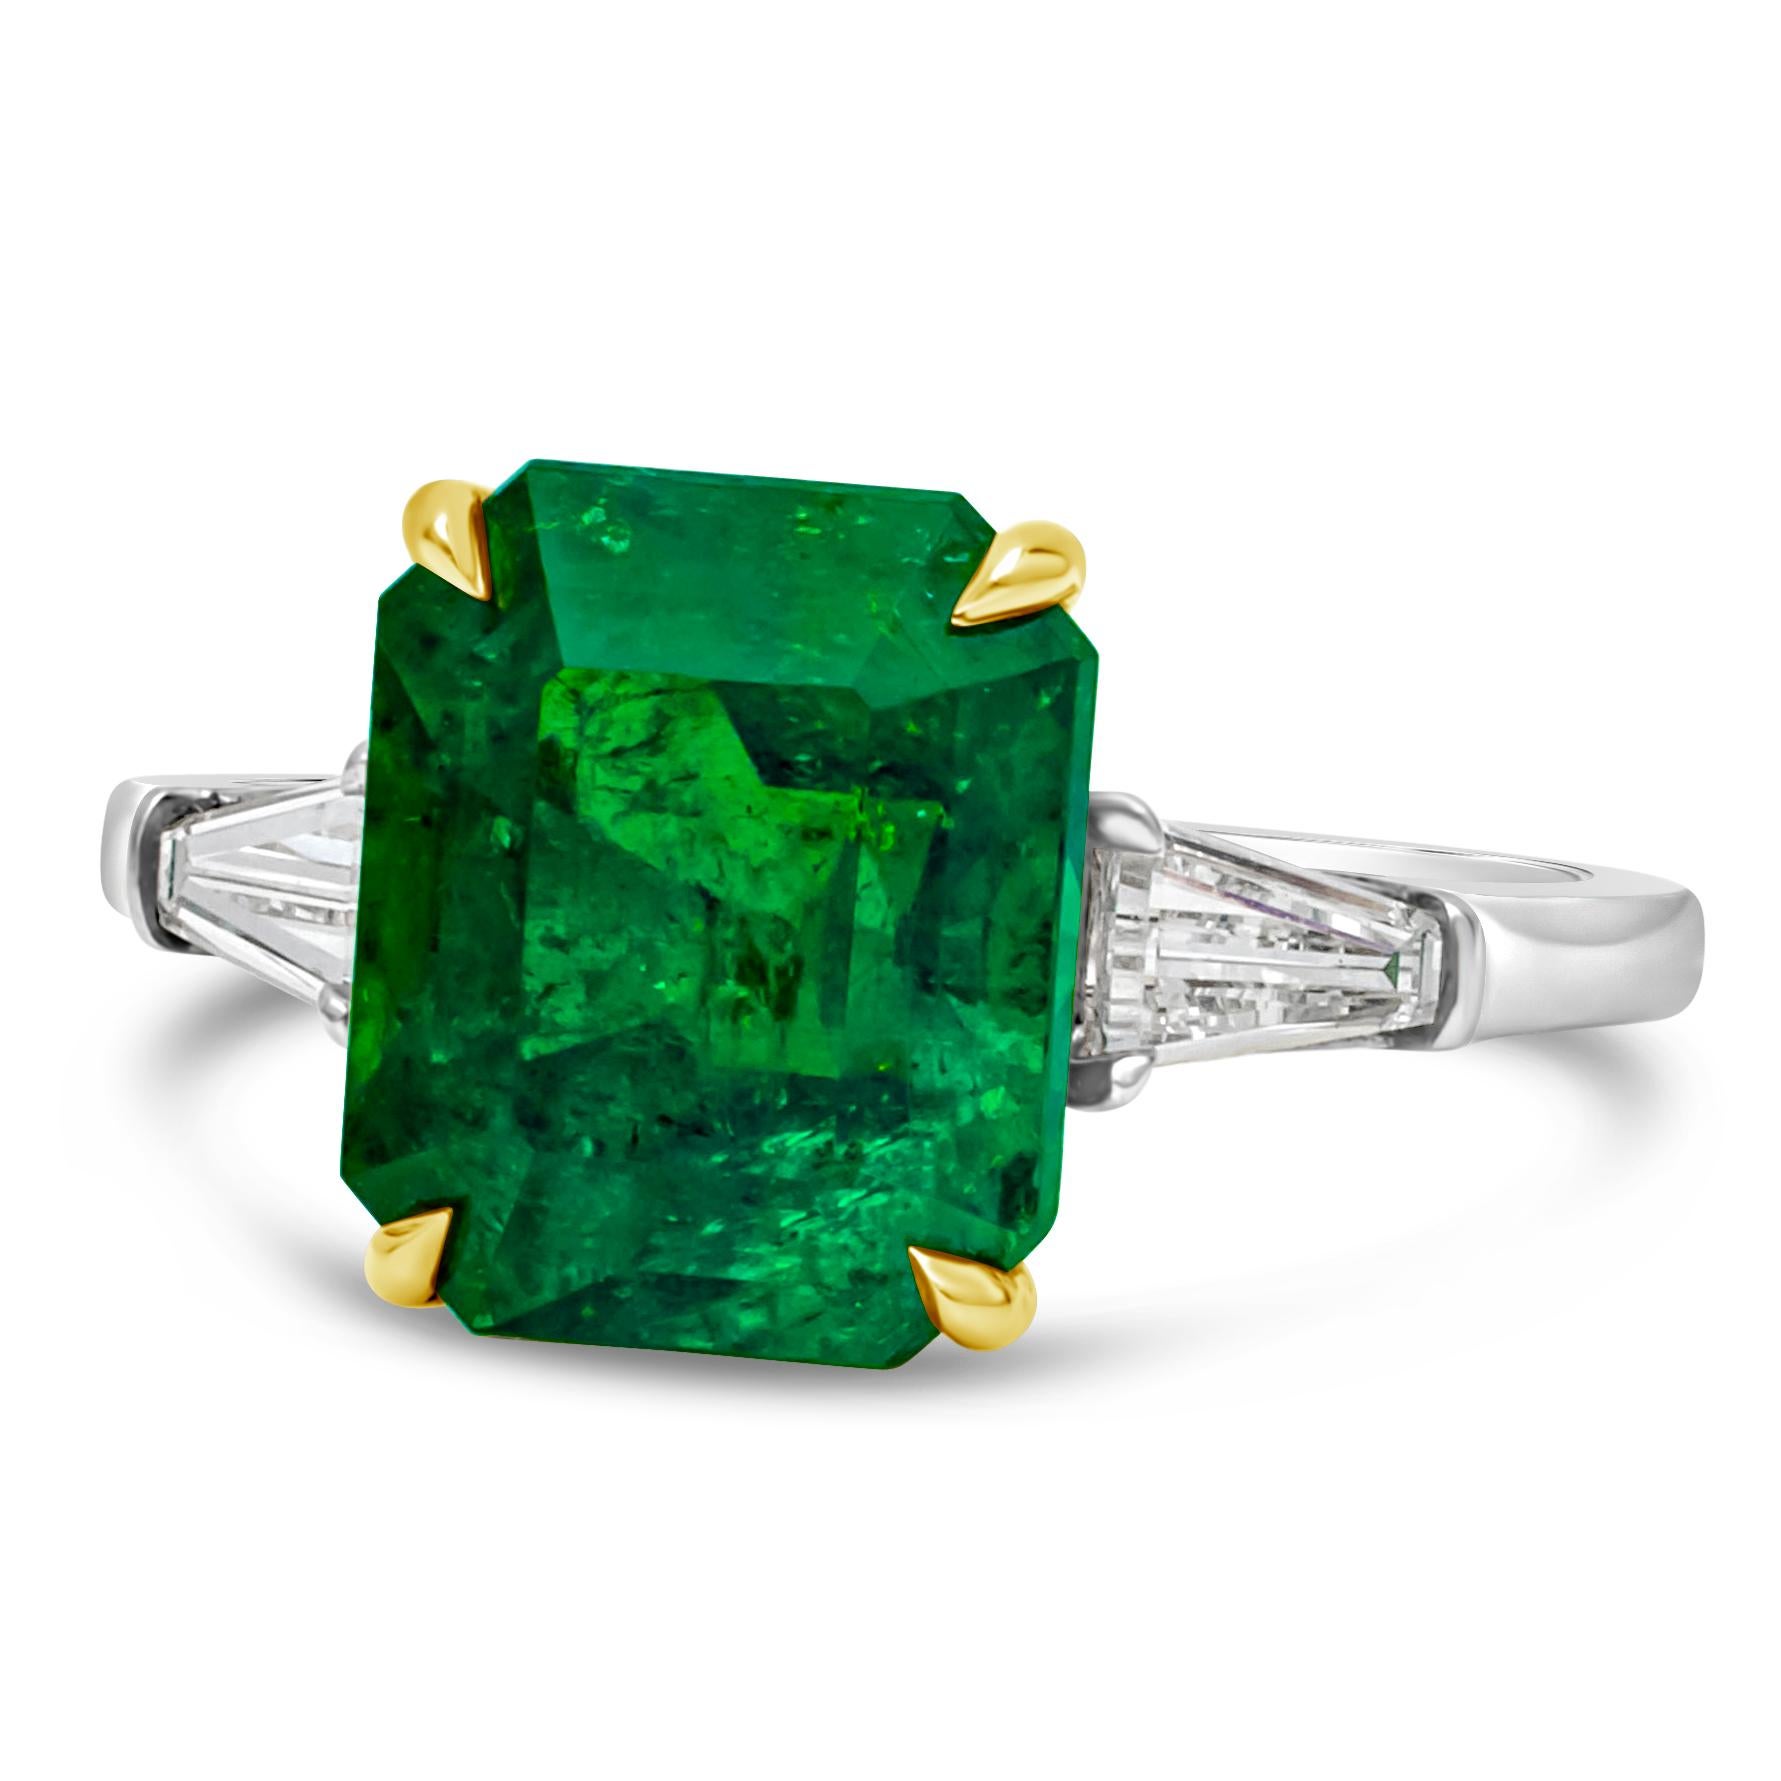 This beautiful and elegant engagement ring showcasing a color-rich emerald cut Colombian emerald center stone weighing 3.84 carats, flanked by two baguette cut diamonds on each side weighing 0.40 carats total. Set in a polished 18k yellow gold and